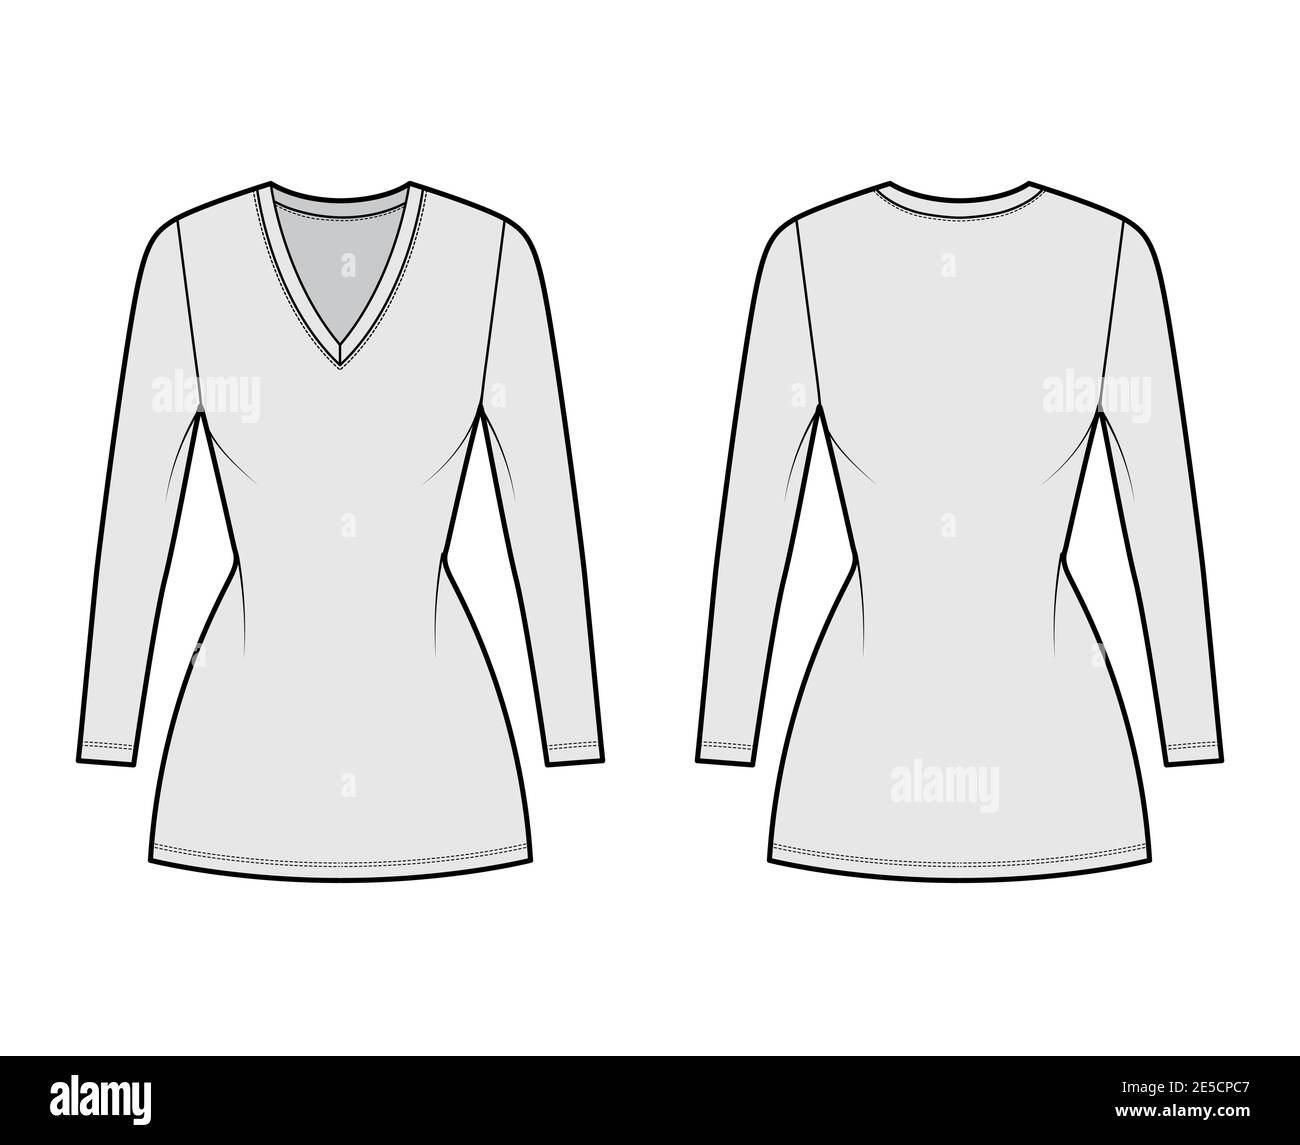 T-shirt dress technical fashion illustration with V-neck, long sleeves, mini length, fitted body, Pencil fullness. Flat apparel template front, back, grey color. Women, men, unisex CAD mockup Stock Vector